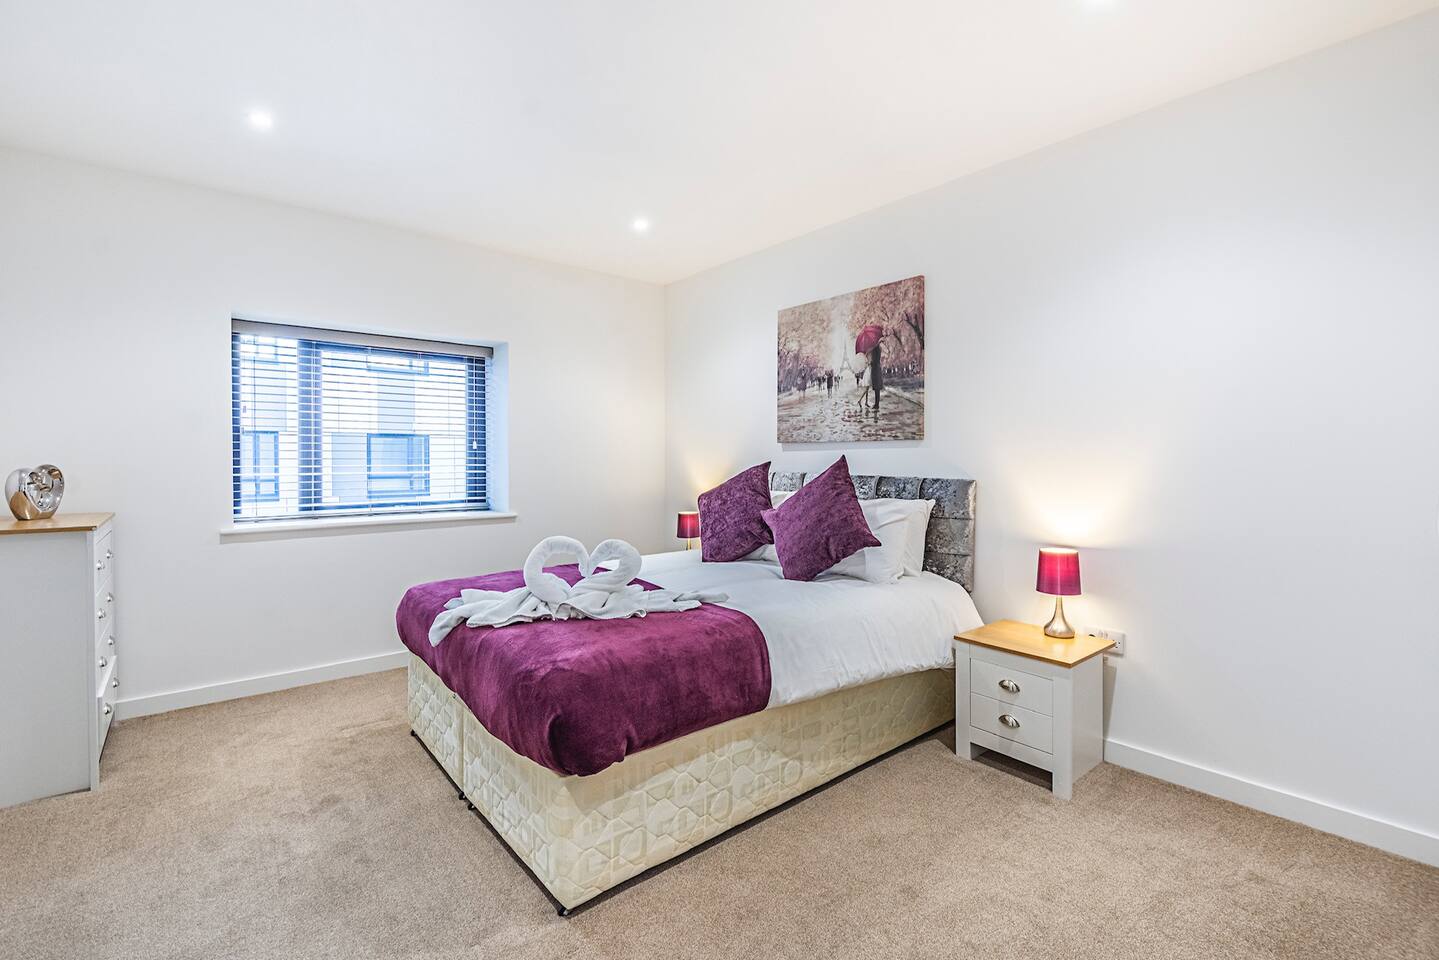 Property Image 1 - Fancy and luxe 1-bedroom flat in the city!